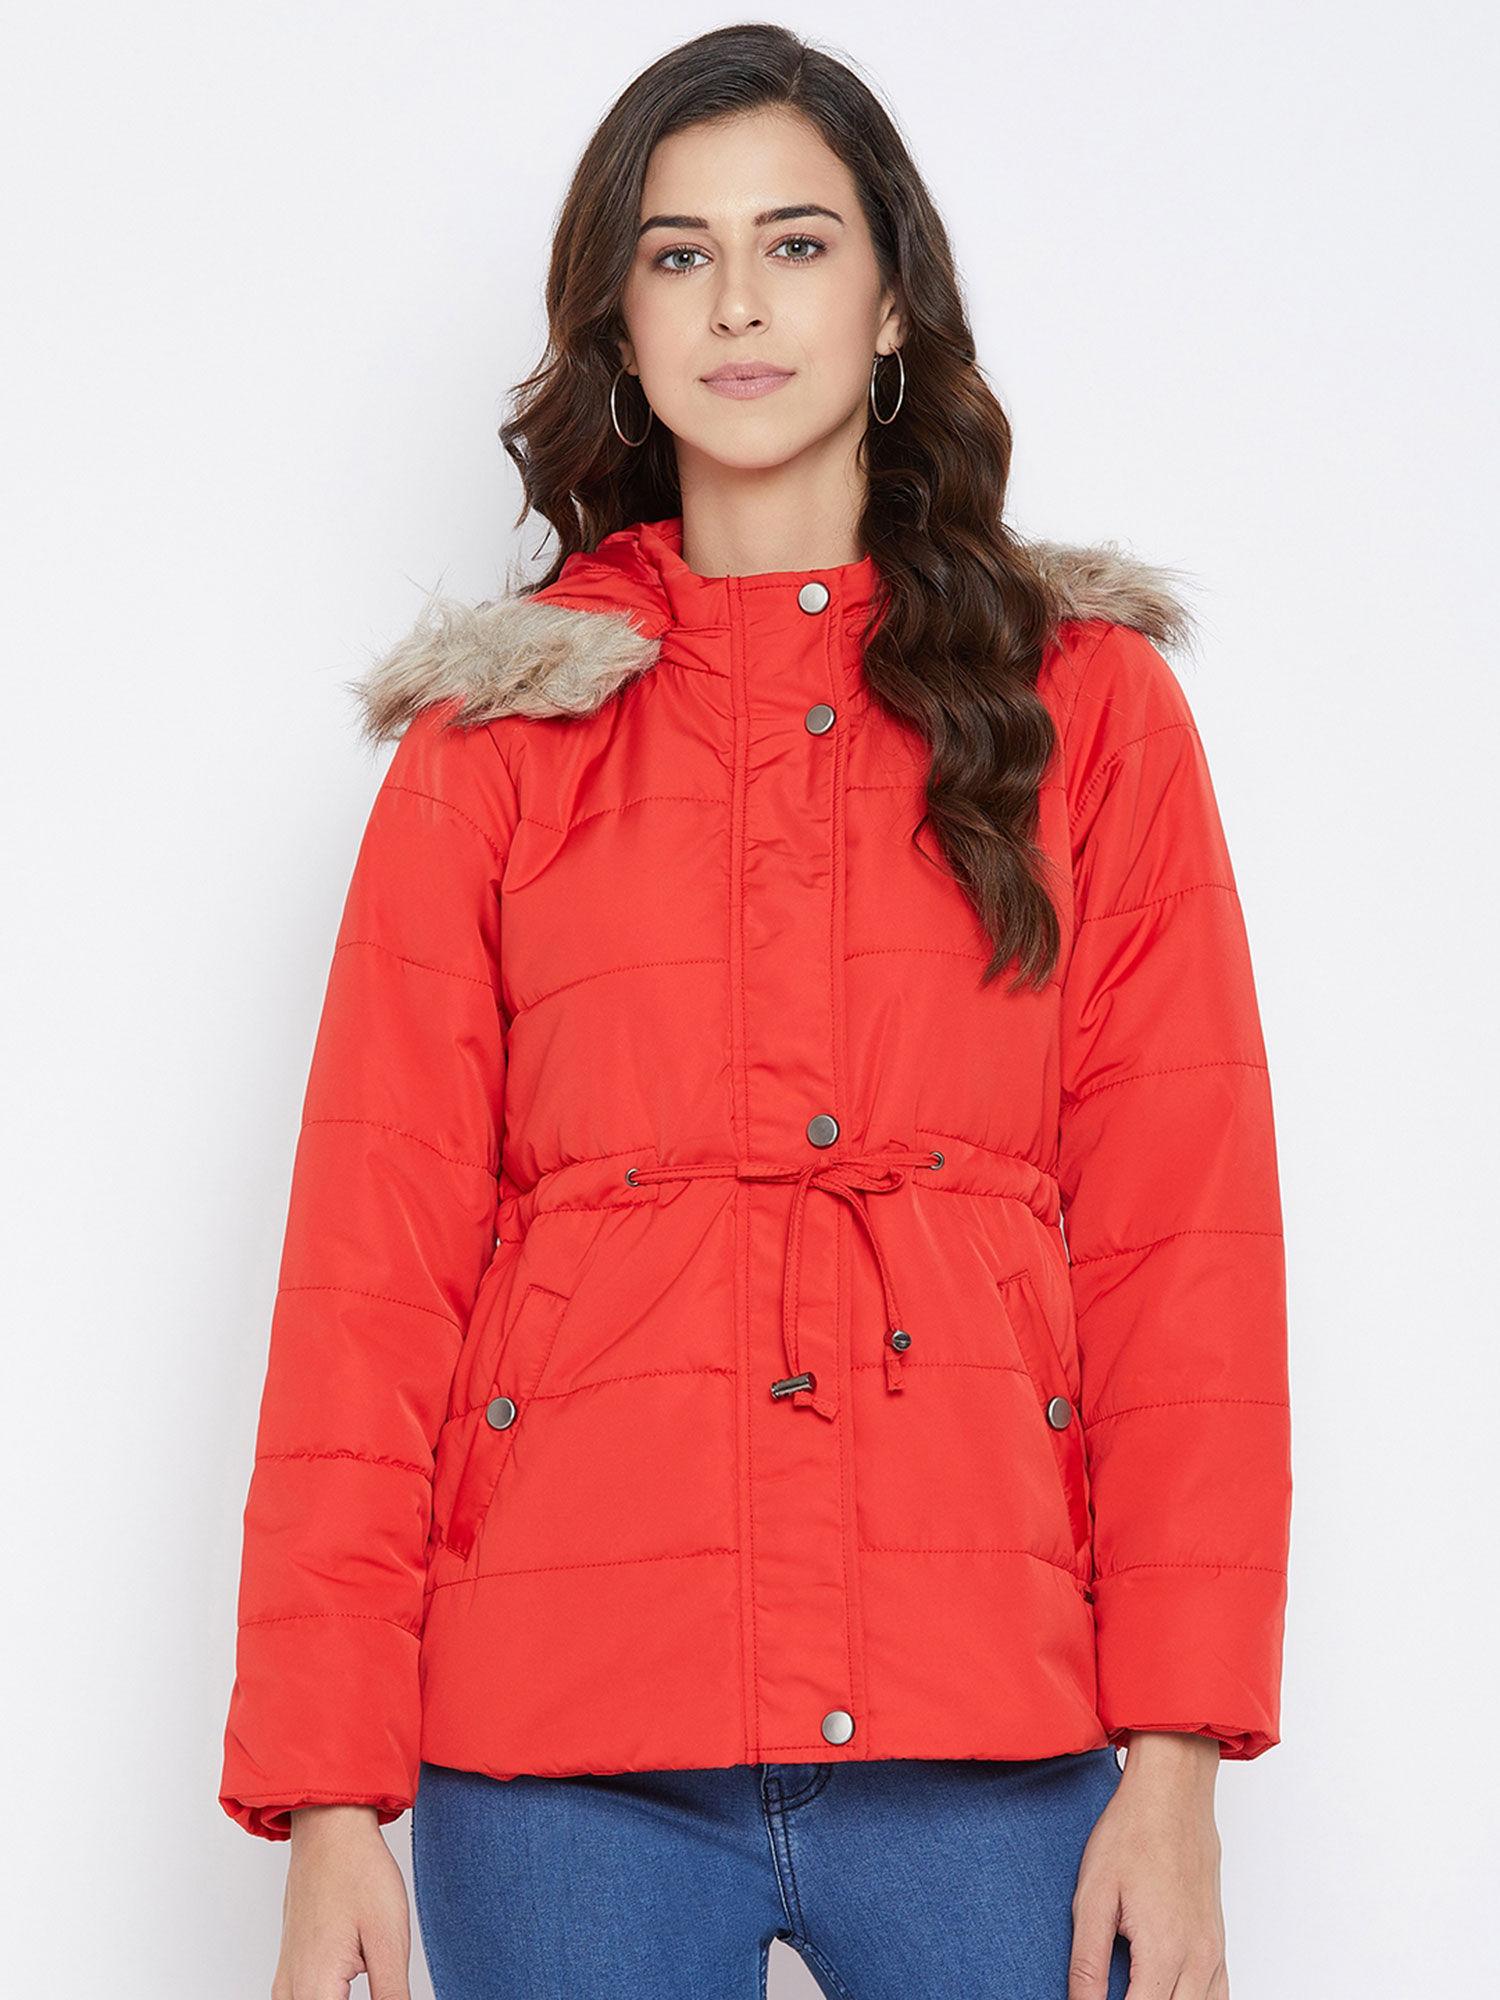 women solid red jacket